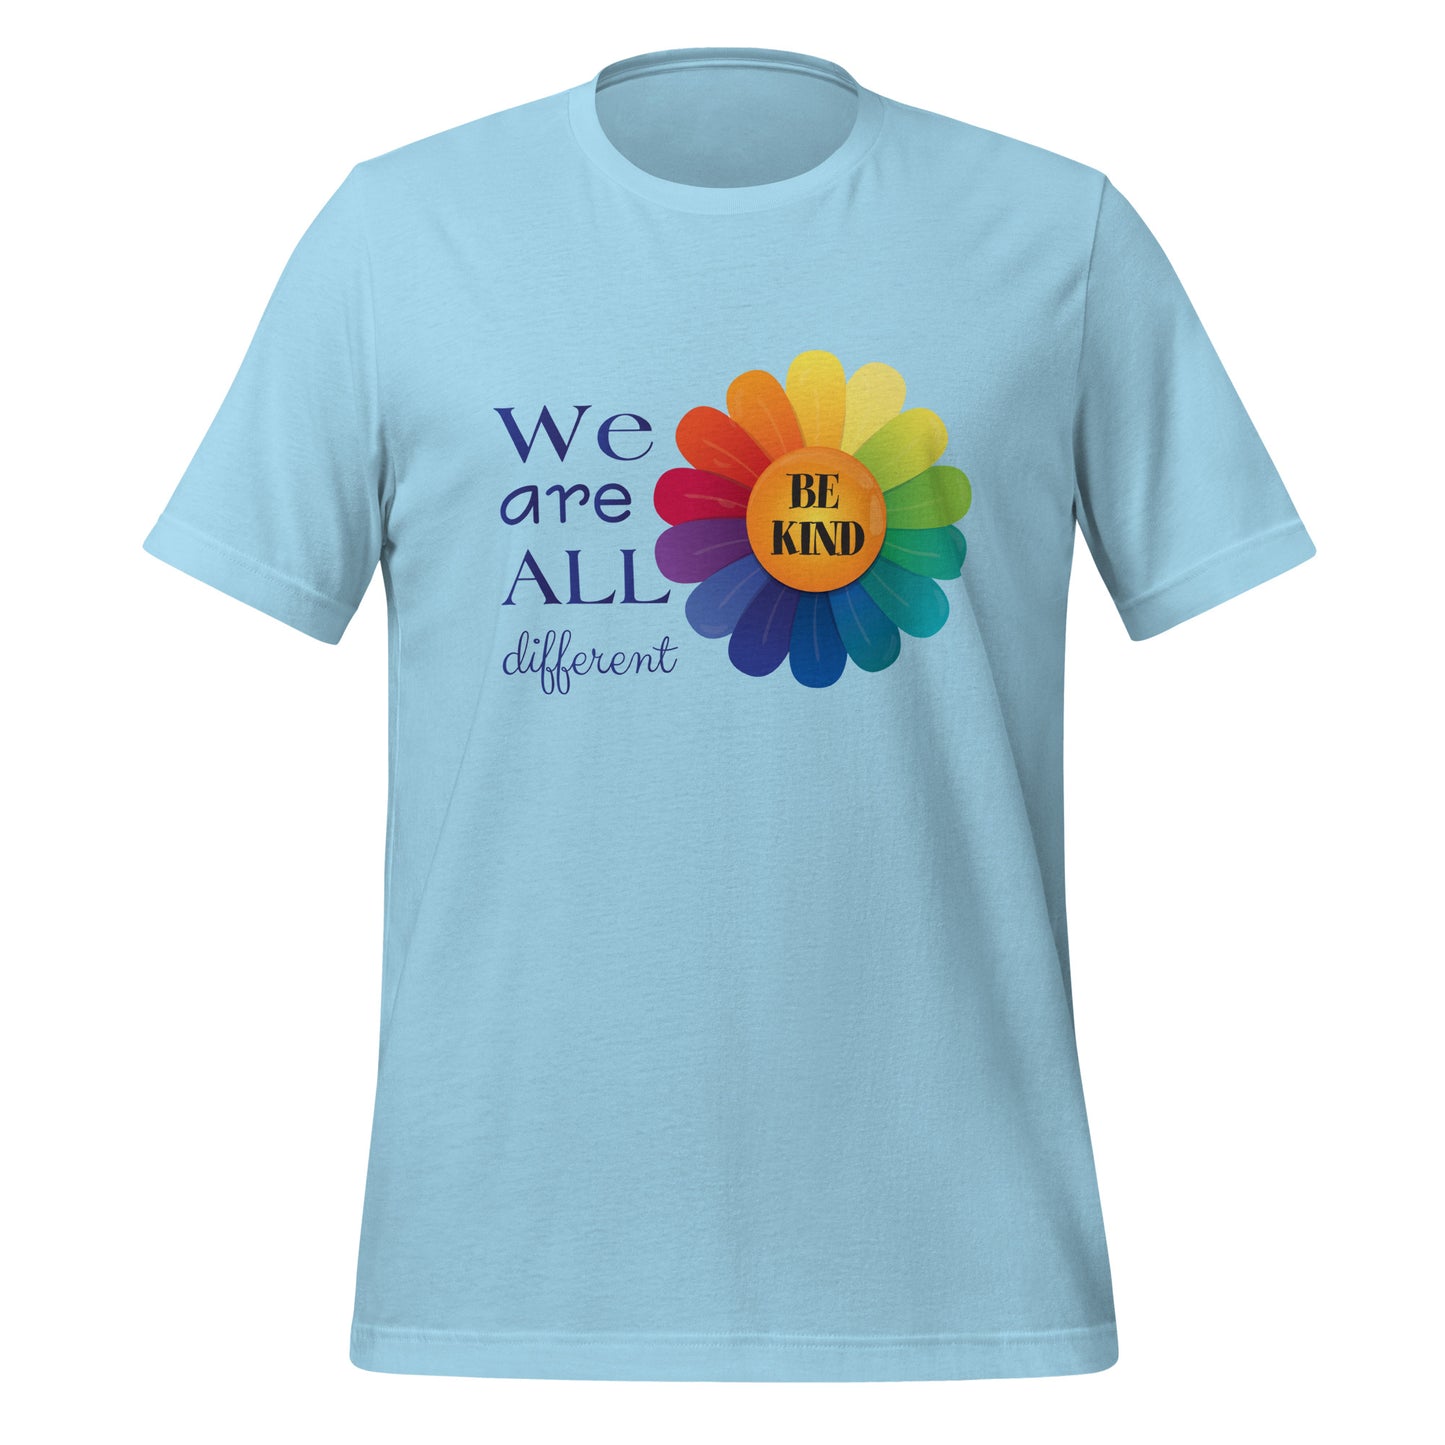 We are all Different P502 Unisex t-shirt